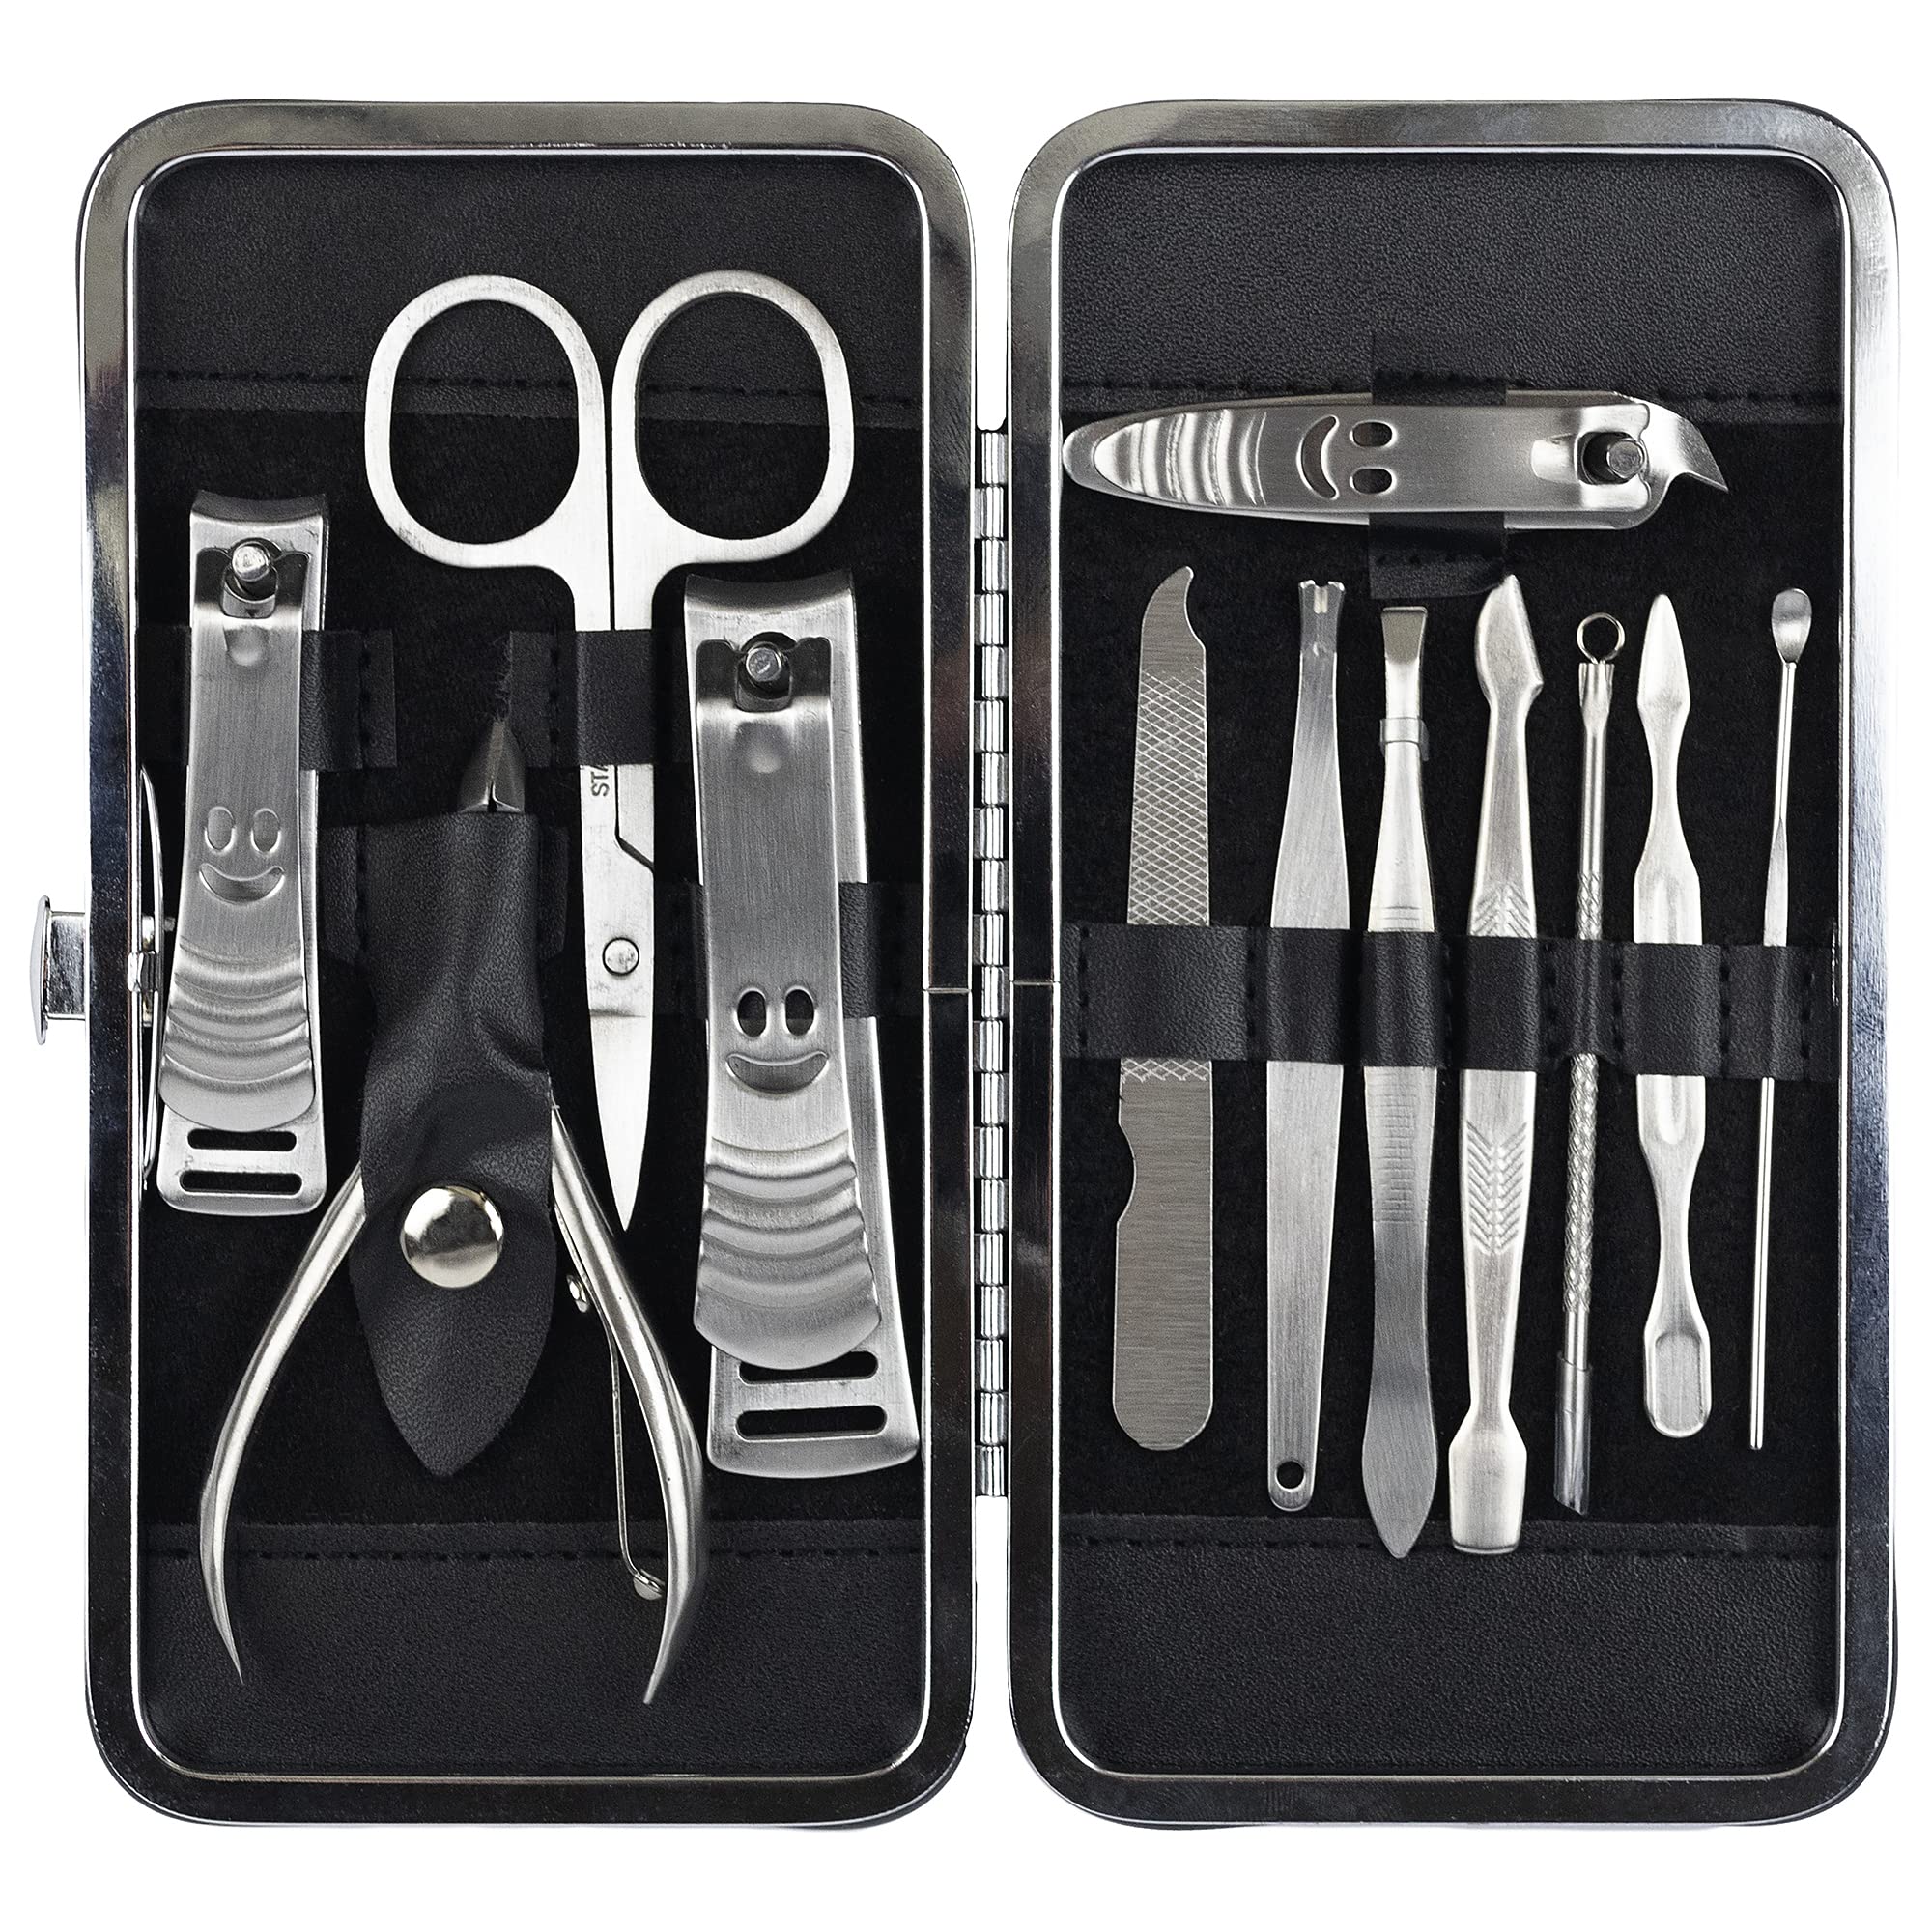 LaRoc Nail Care Manicure Set 12 Piece Professional Nail Clippers Kit Pedicure Care Tools-Stainless Steel Grooming Tools With PU Leather Case for Travel & Home